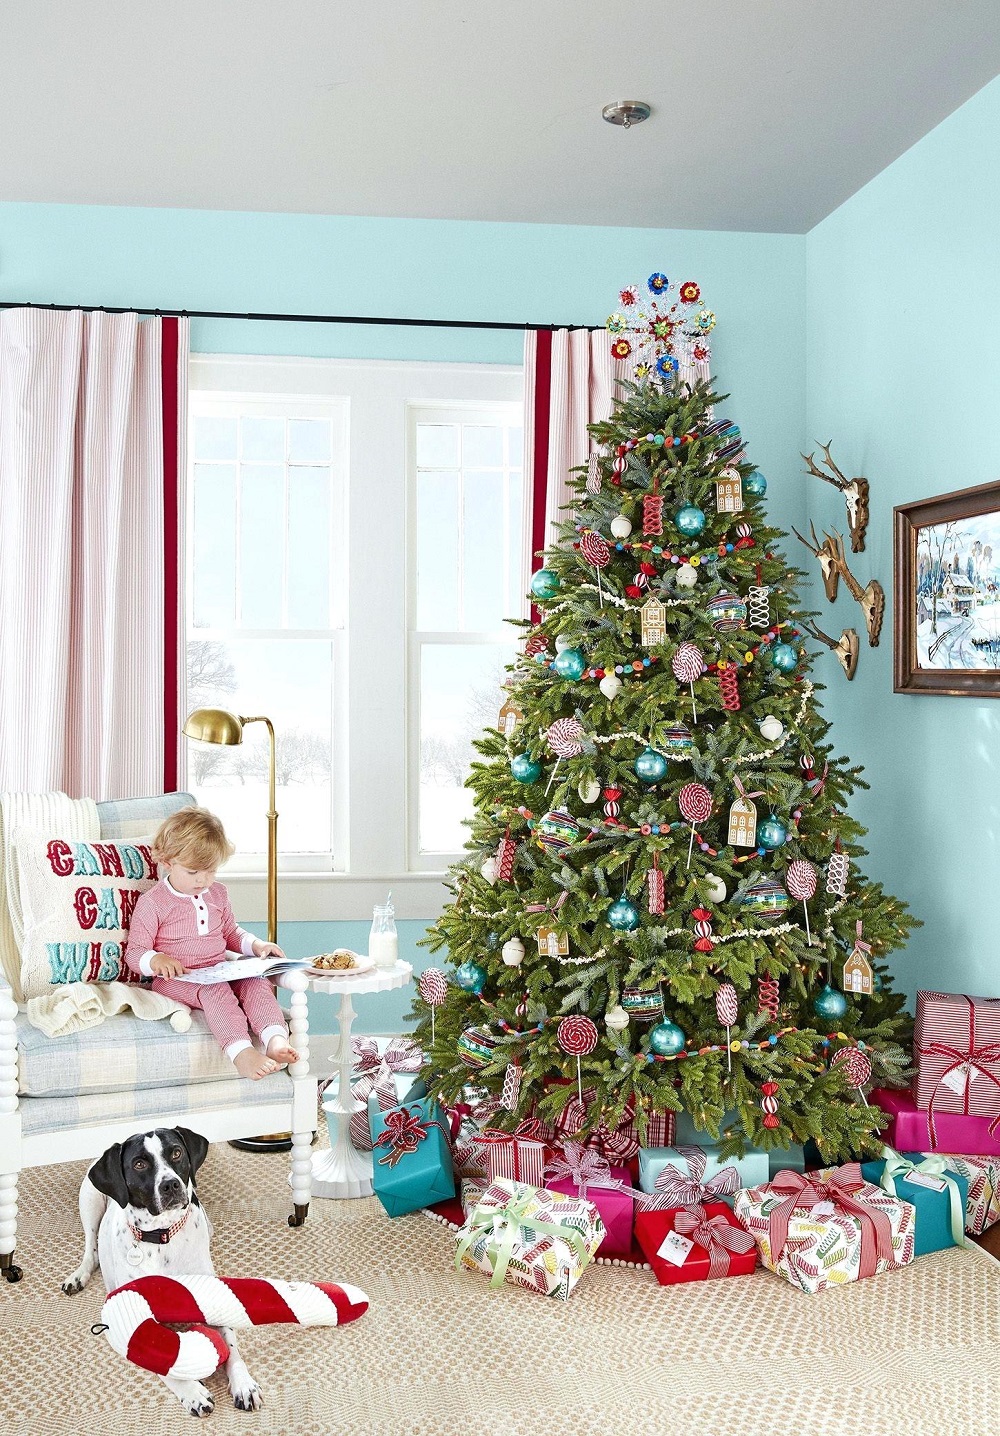 t3-140 Christmas living room decorations you must try in the holiday season